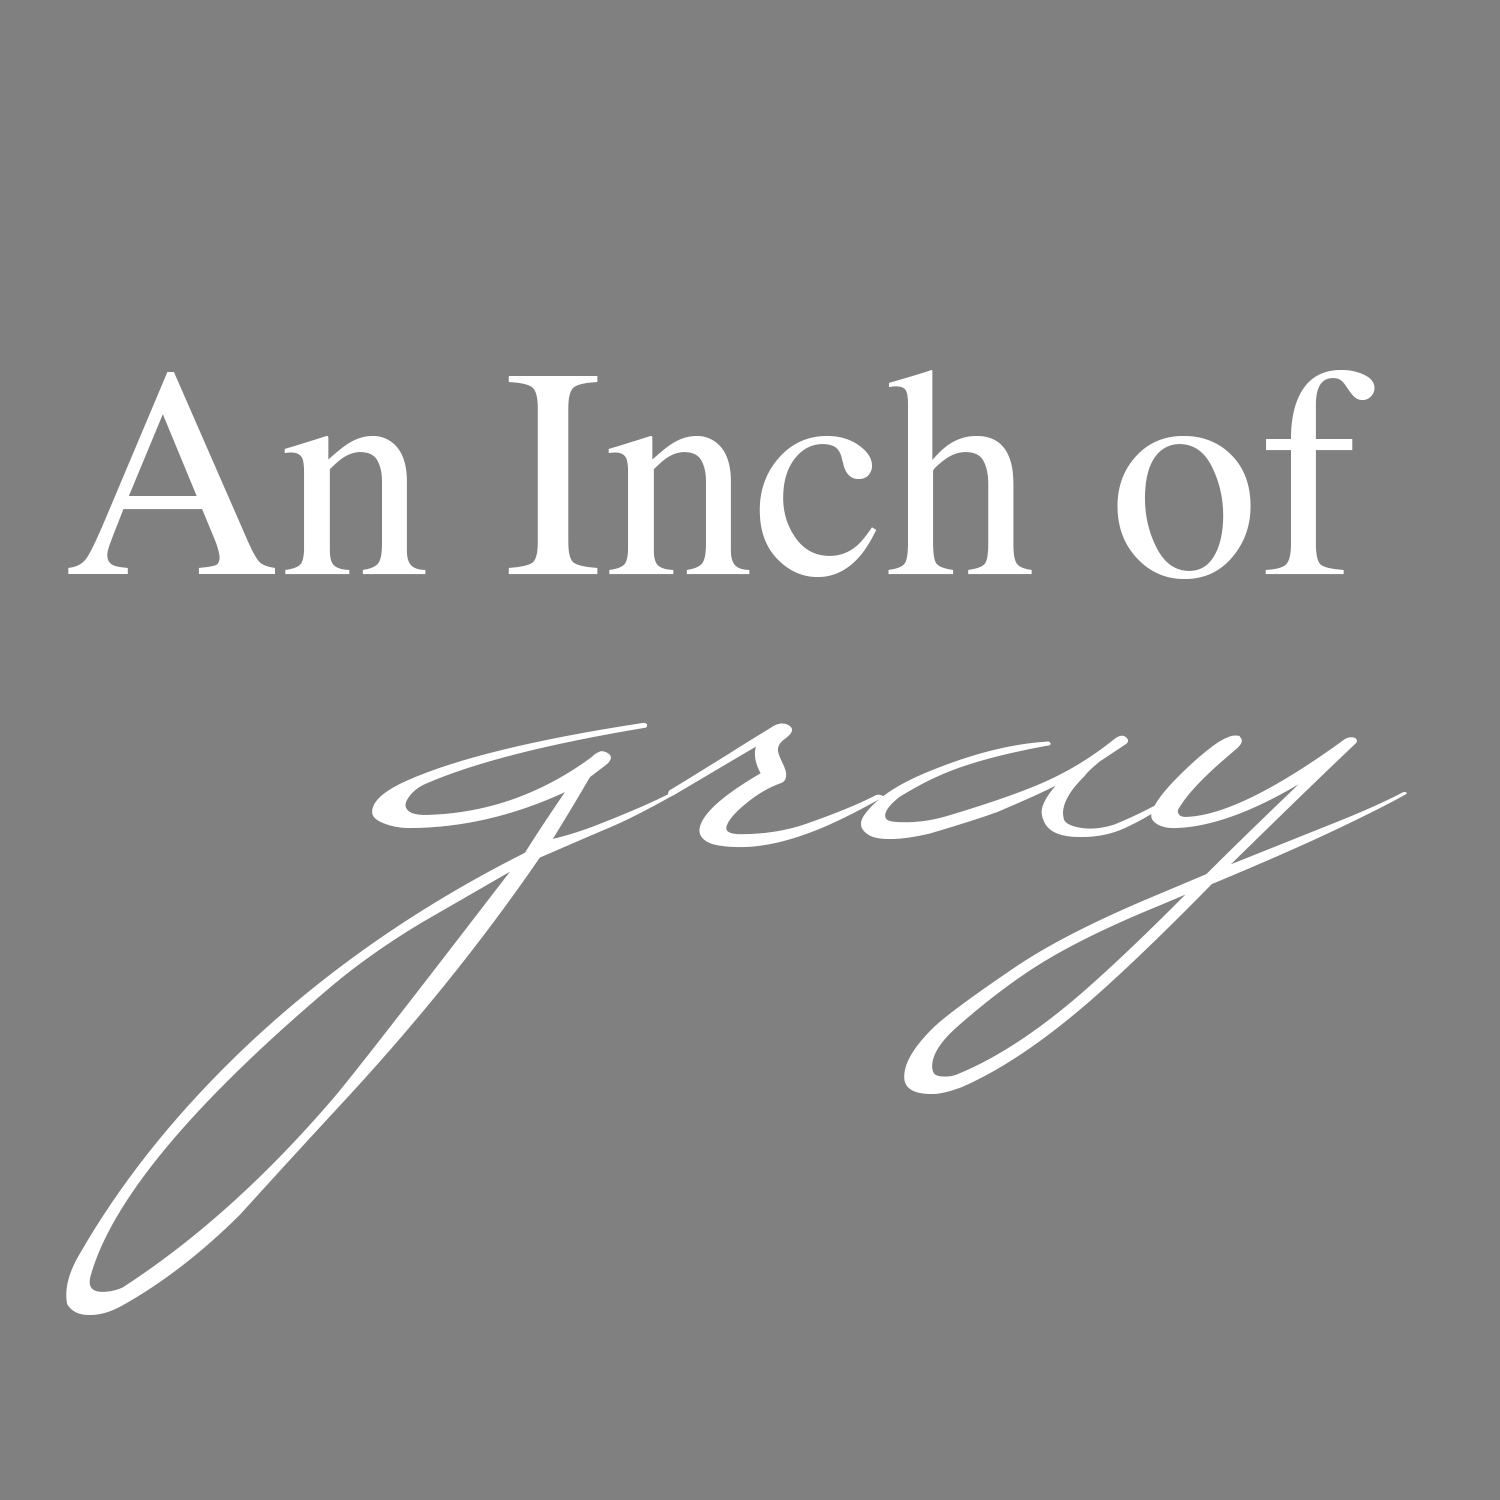 An Inch of Gray